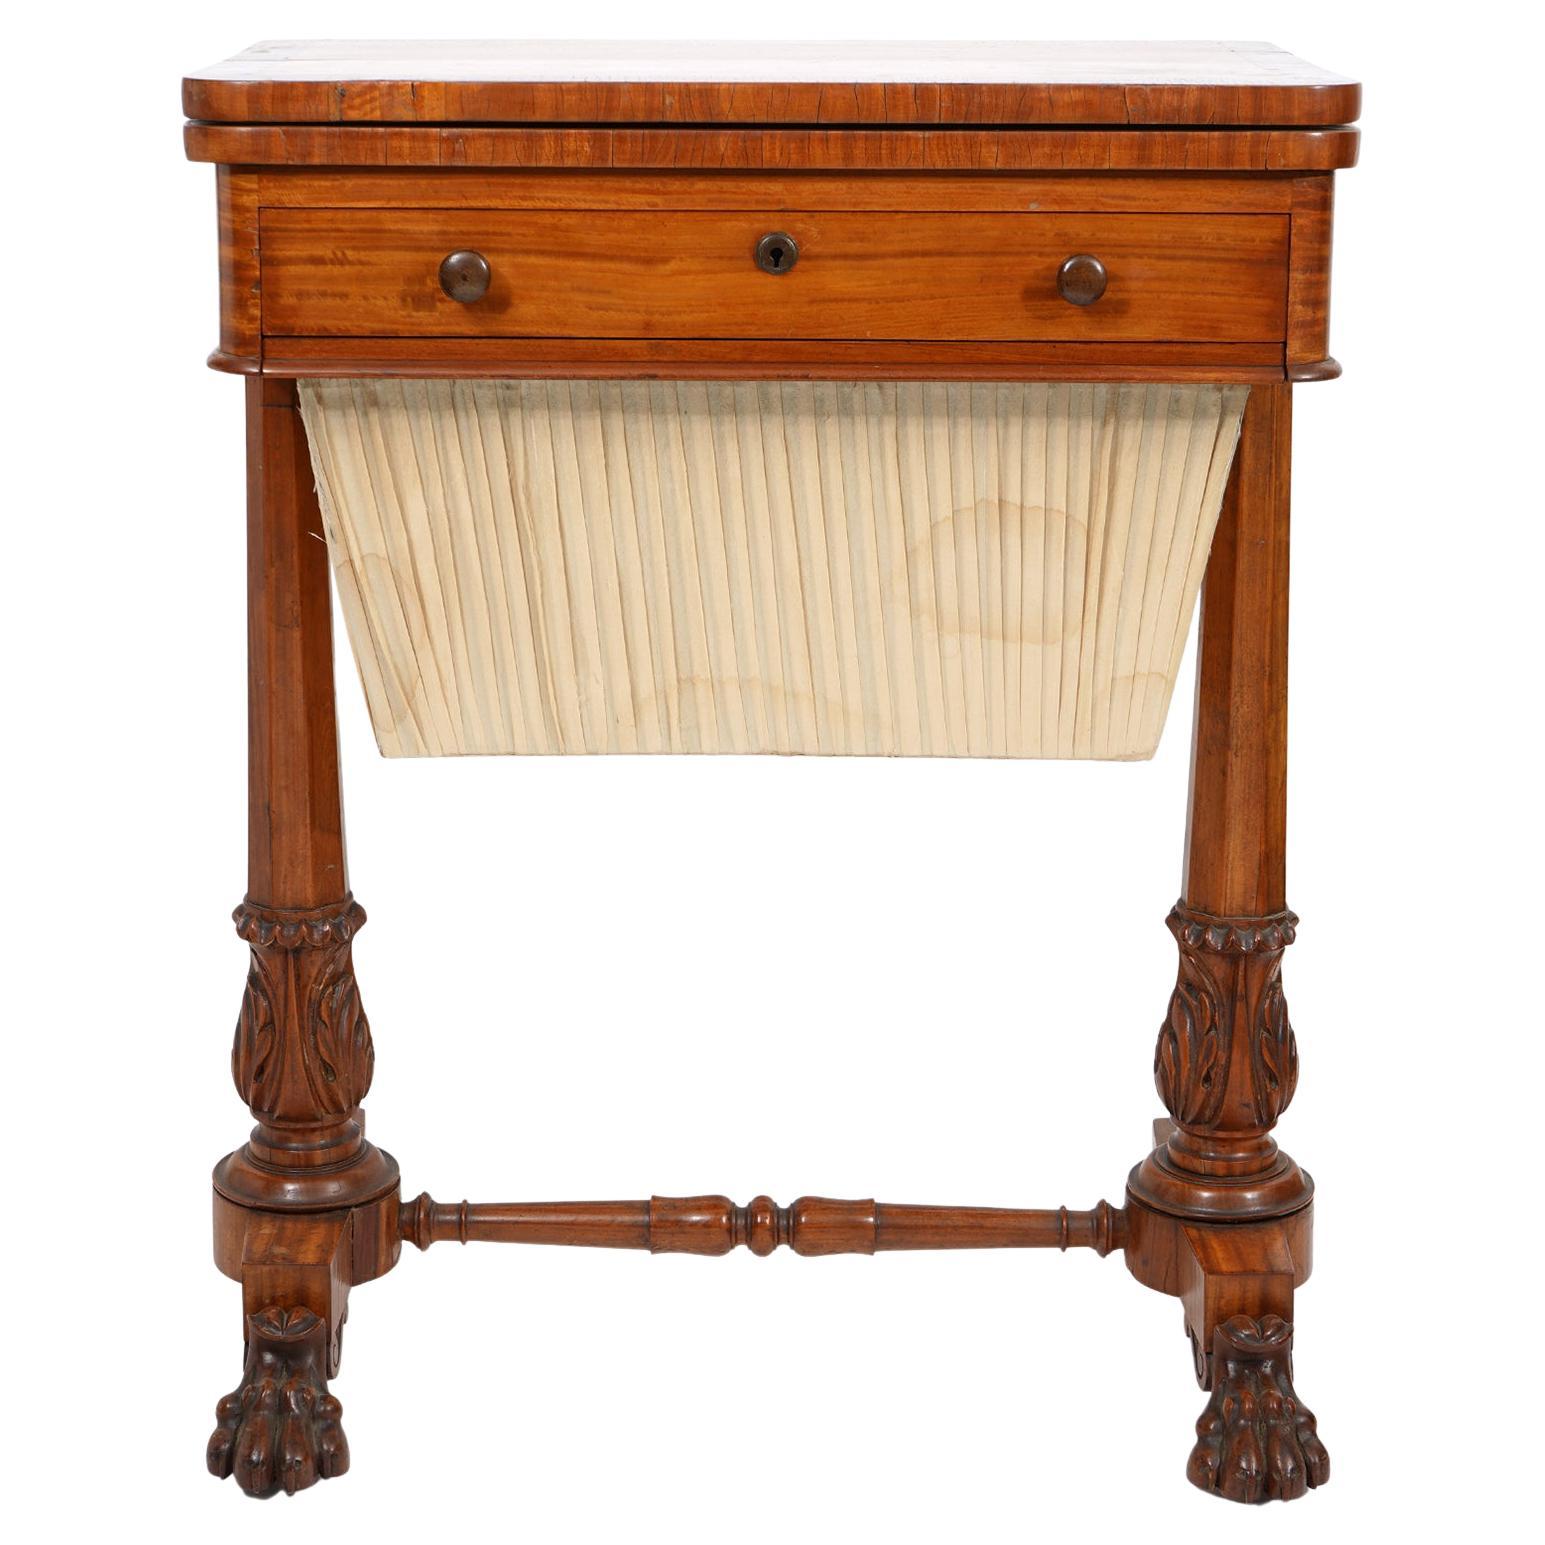 William IV Carved Mahogany and Satinwood Game and Sewing Table, C. 1840